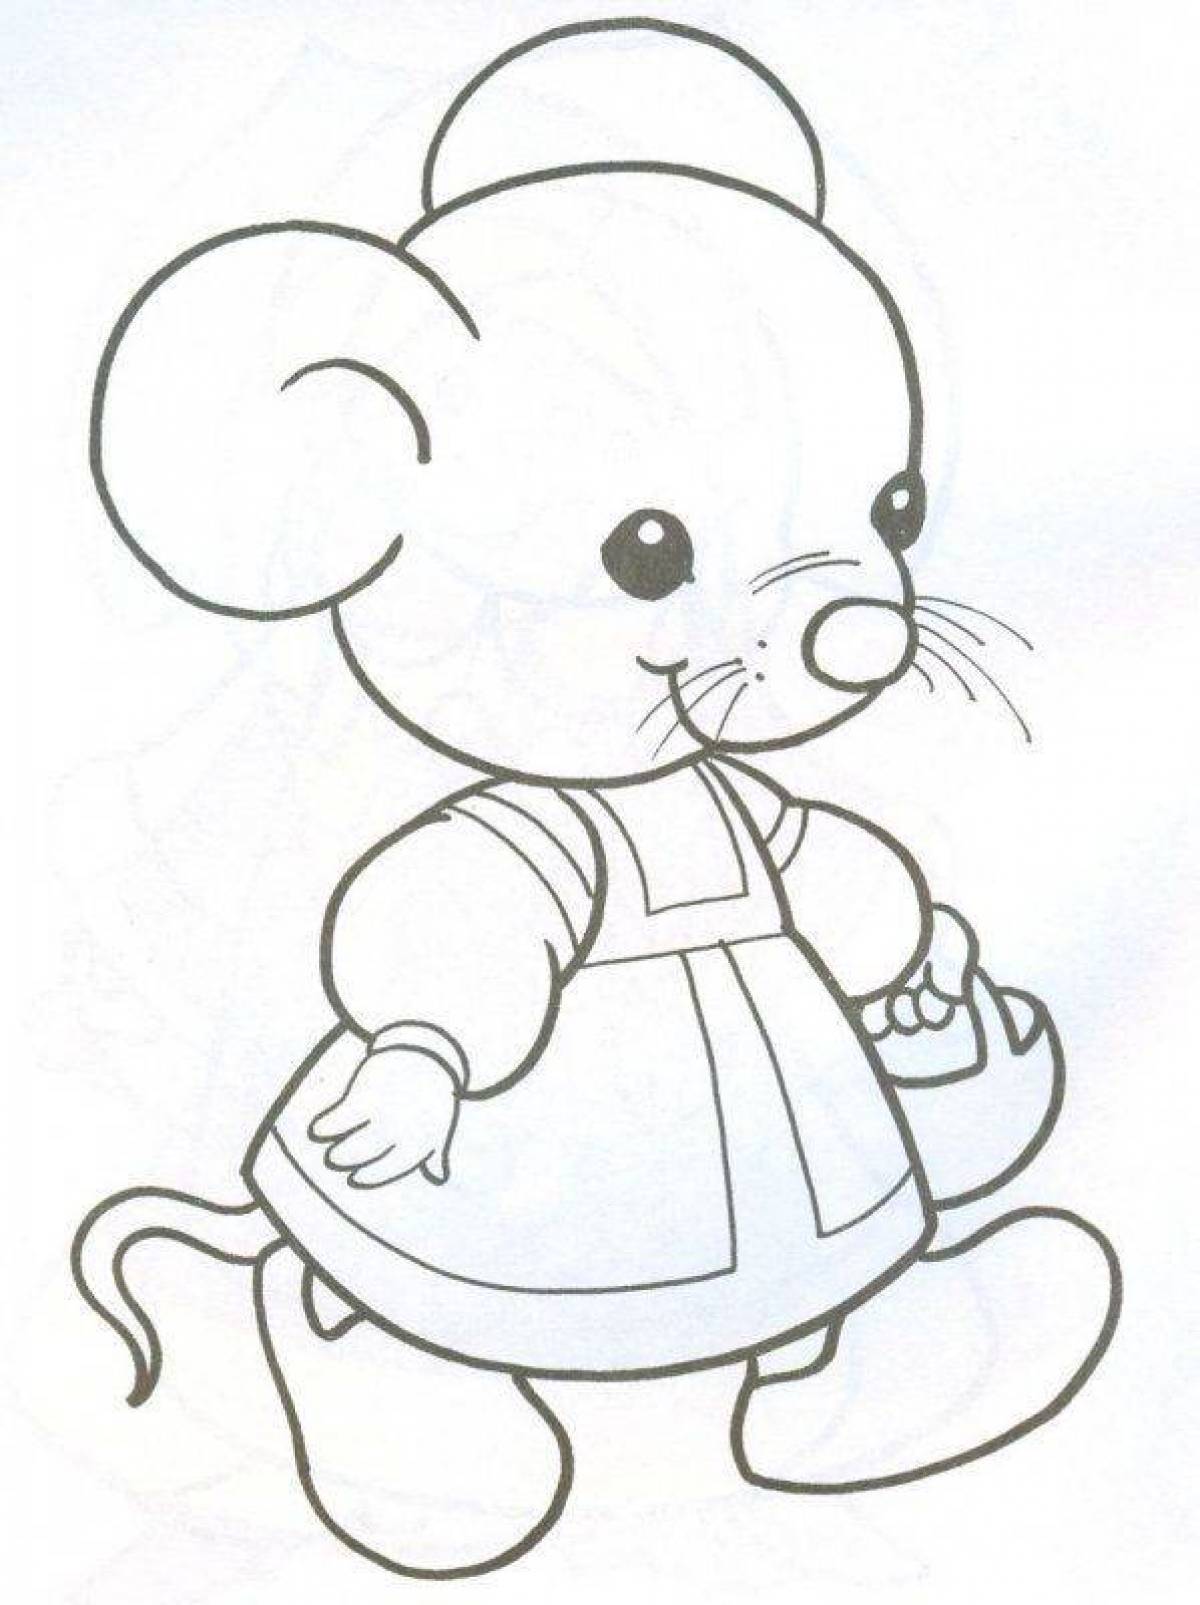 Coloring book shining mouse